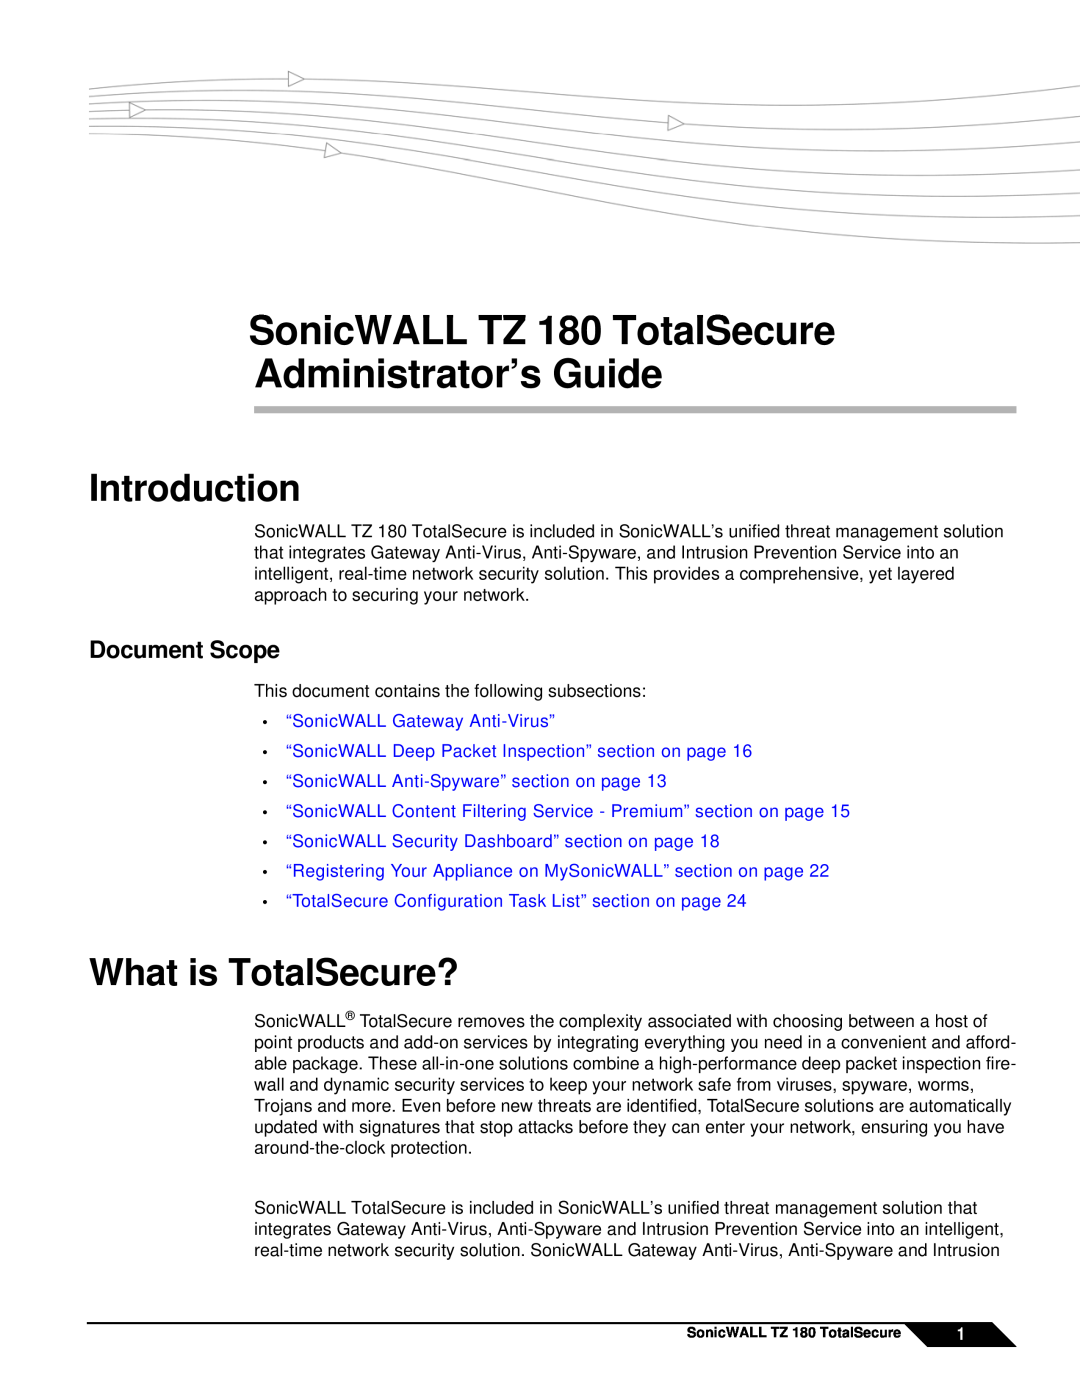 SonicWALL manual SonicWALL TZ 180 Wireless Getting Started Guide, SonicWALL Internet Security Appliances 